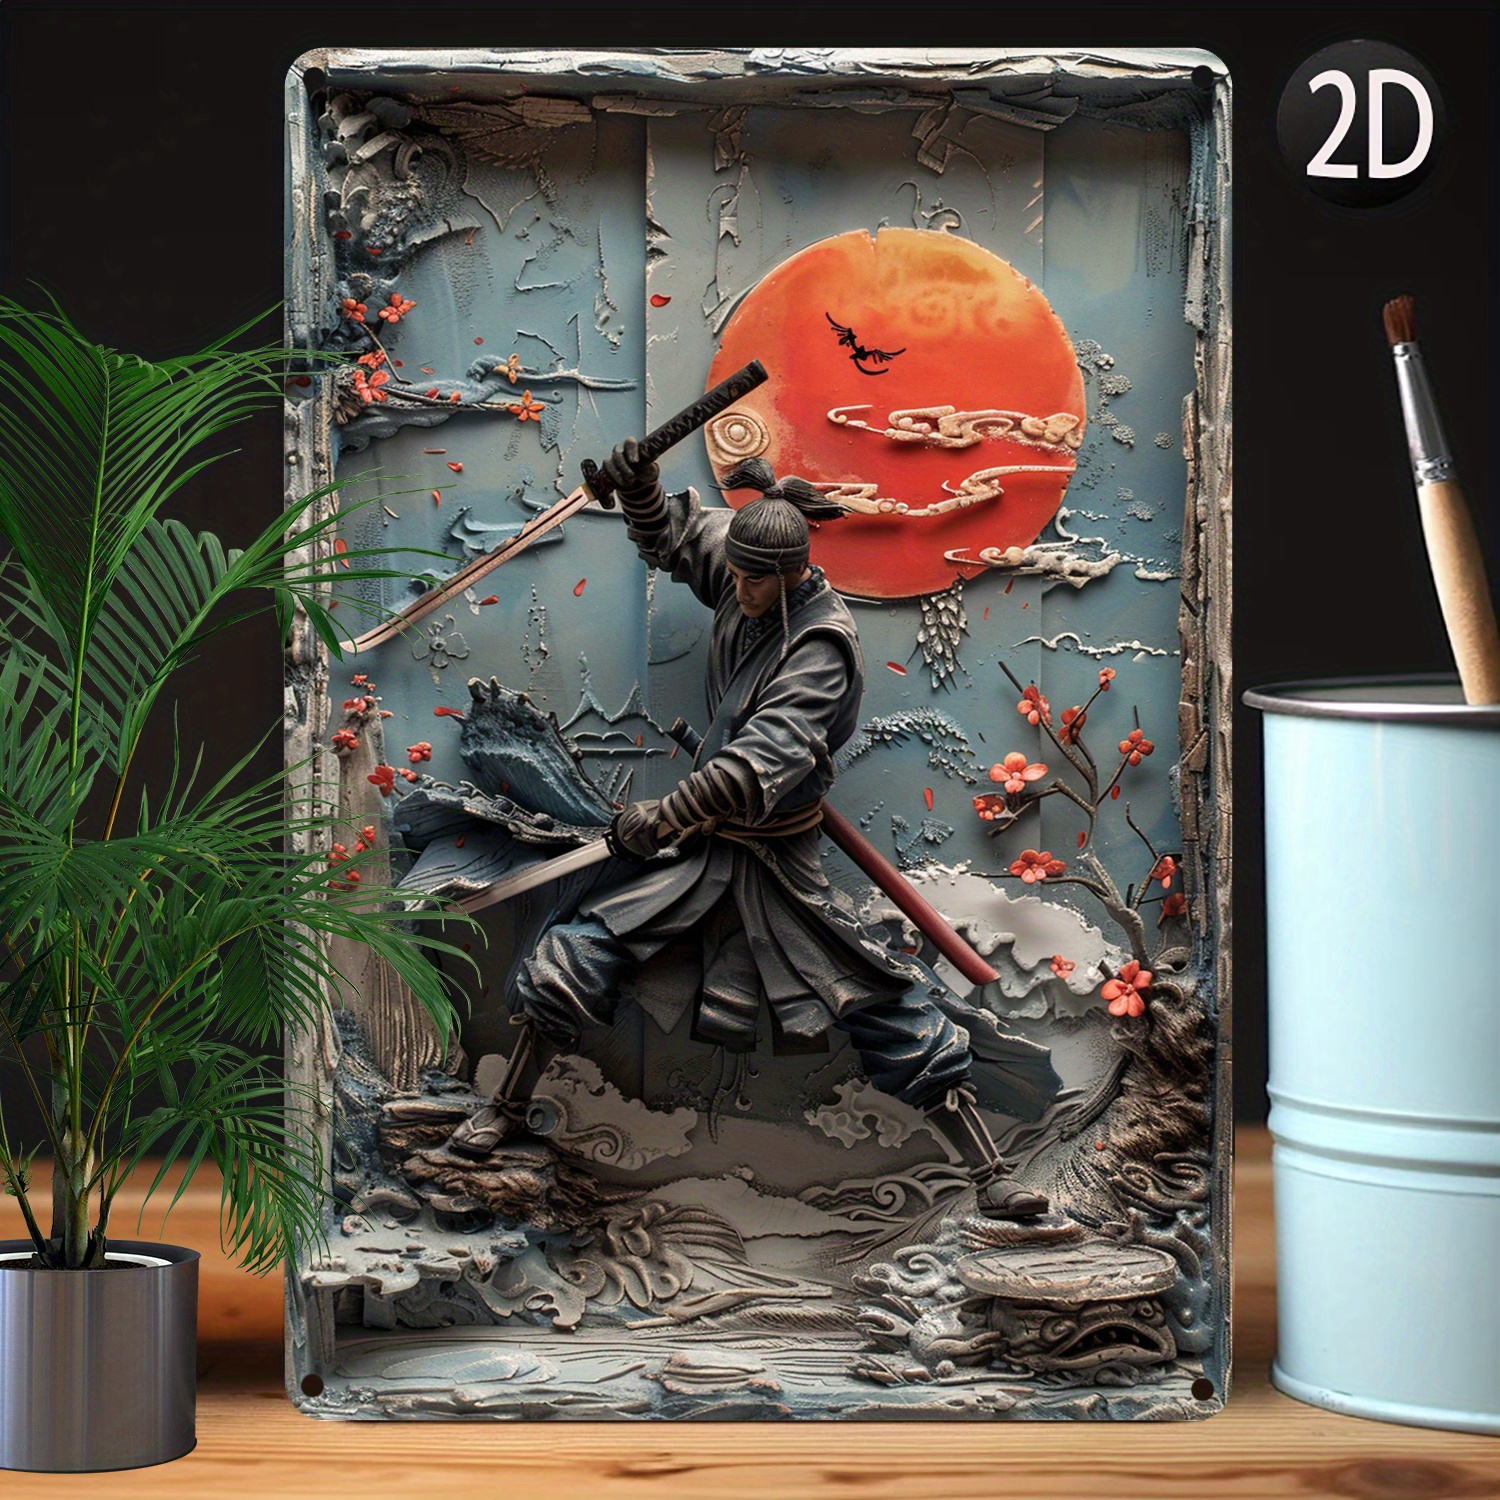 

Vintage Japanese Samurai Metal Tin Sign - 8x12 Inches, Perfect For Bedroom, Living Room, Garden, Or Classroom Decor - Unique Birthday Gift For Men